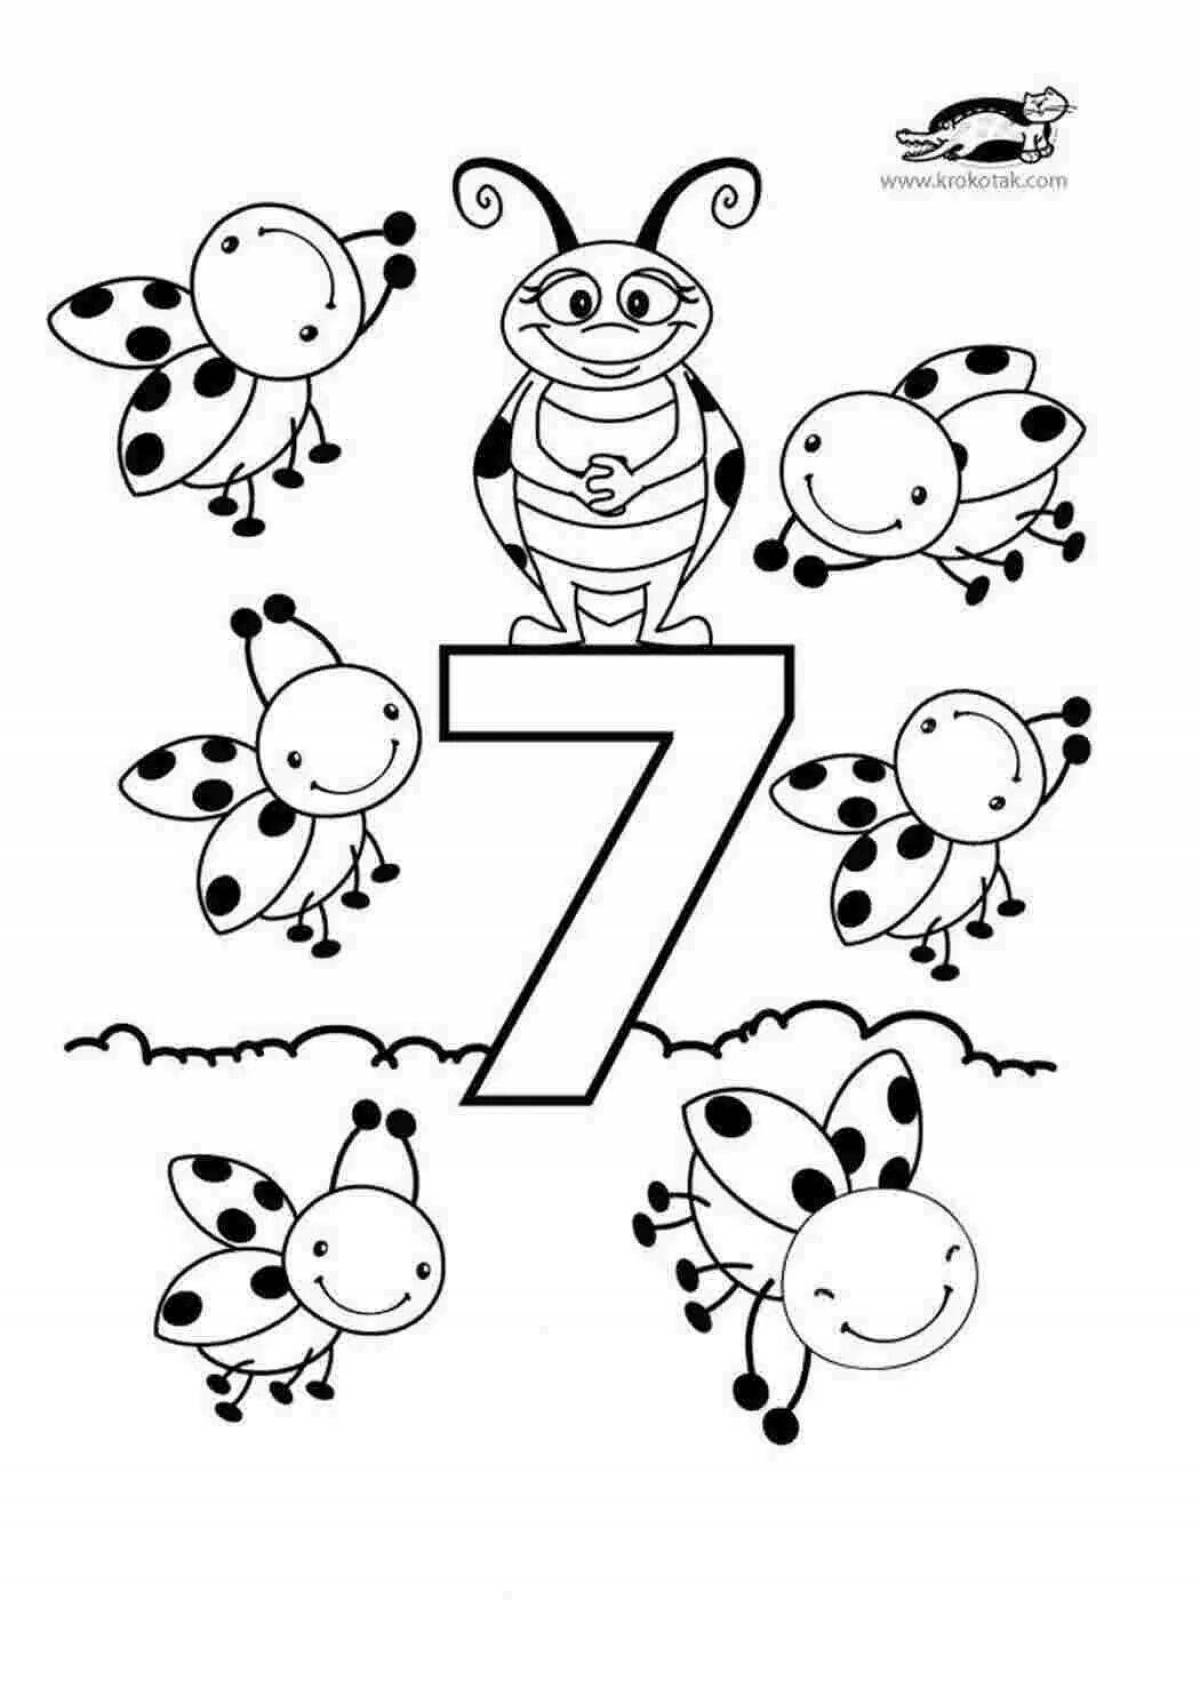 Number 7 coloring pages for preschoolers